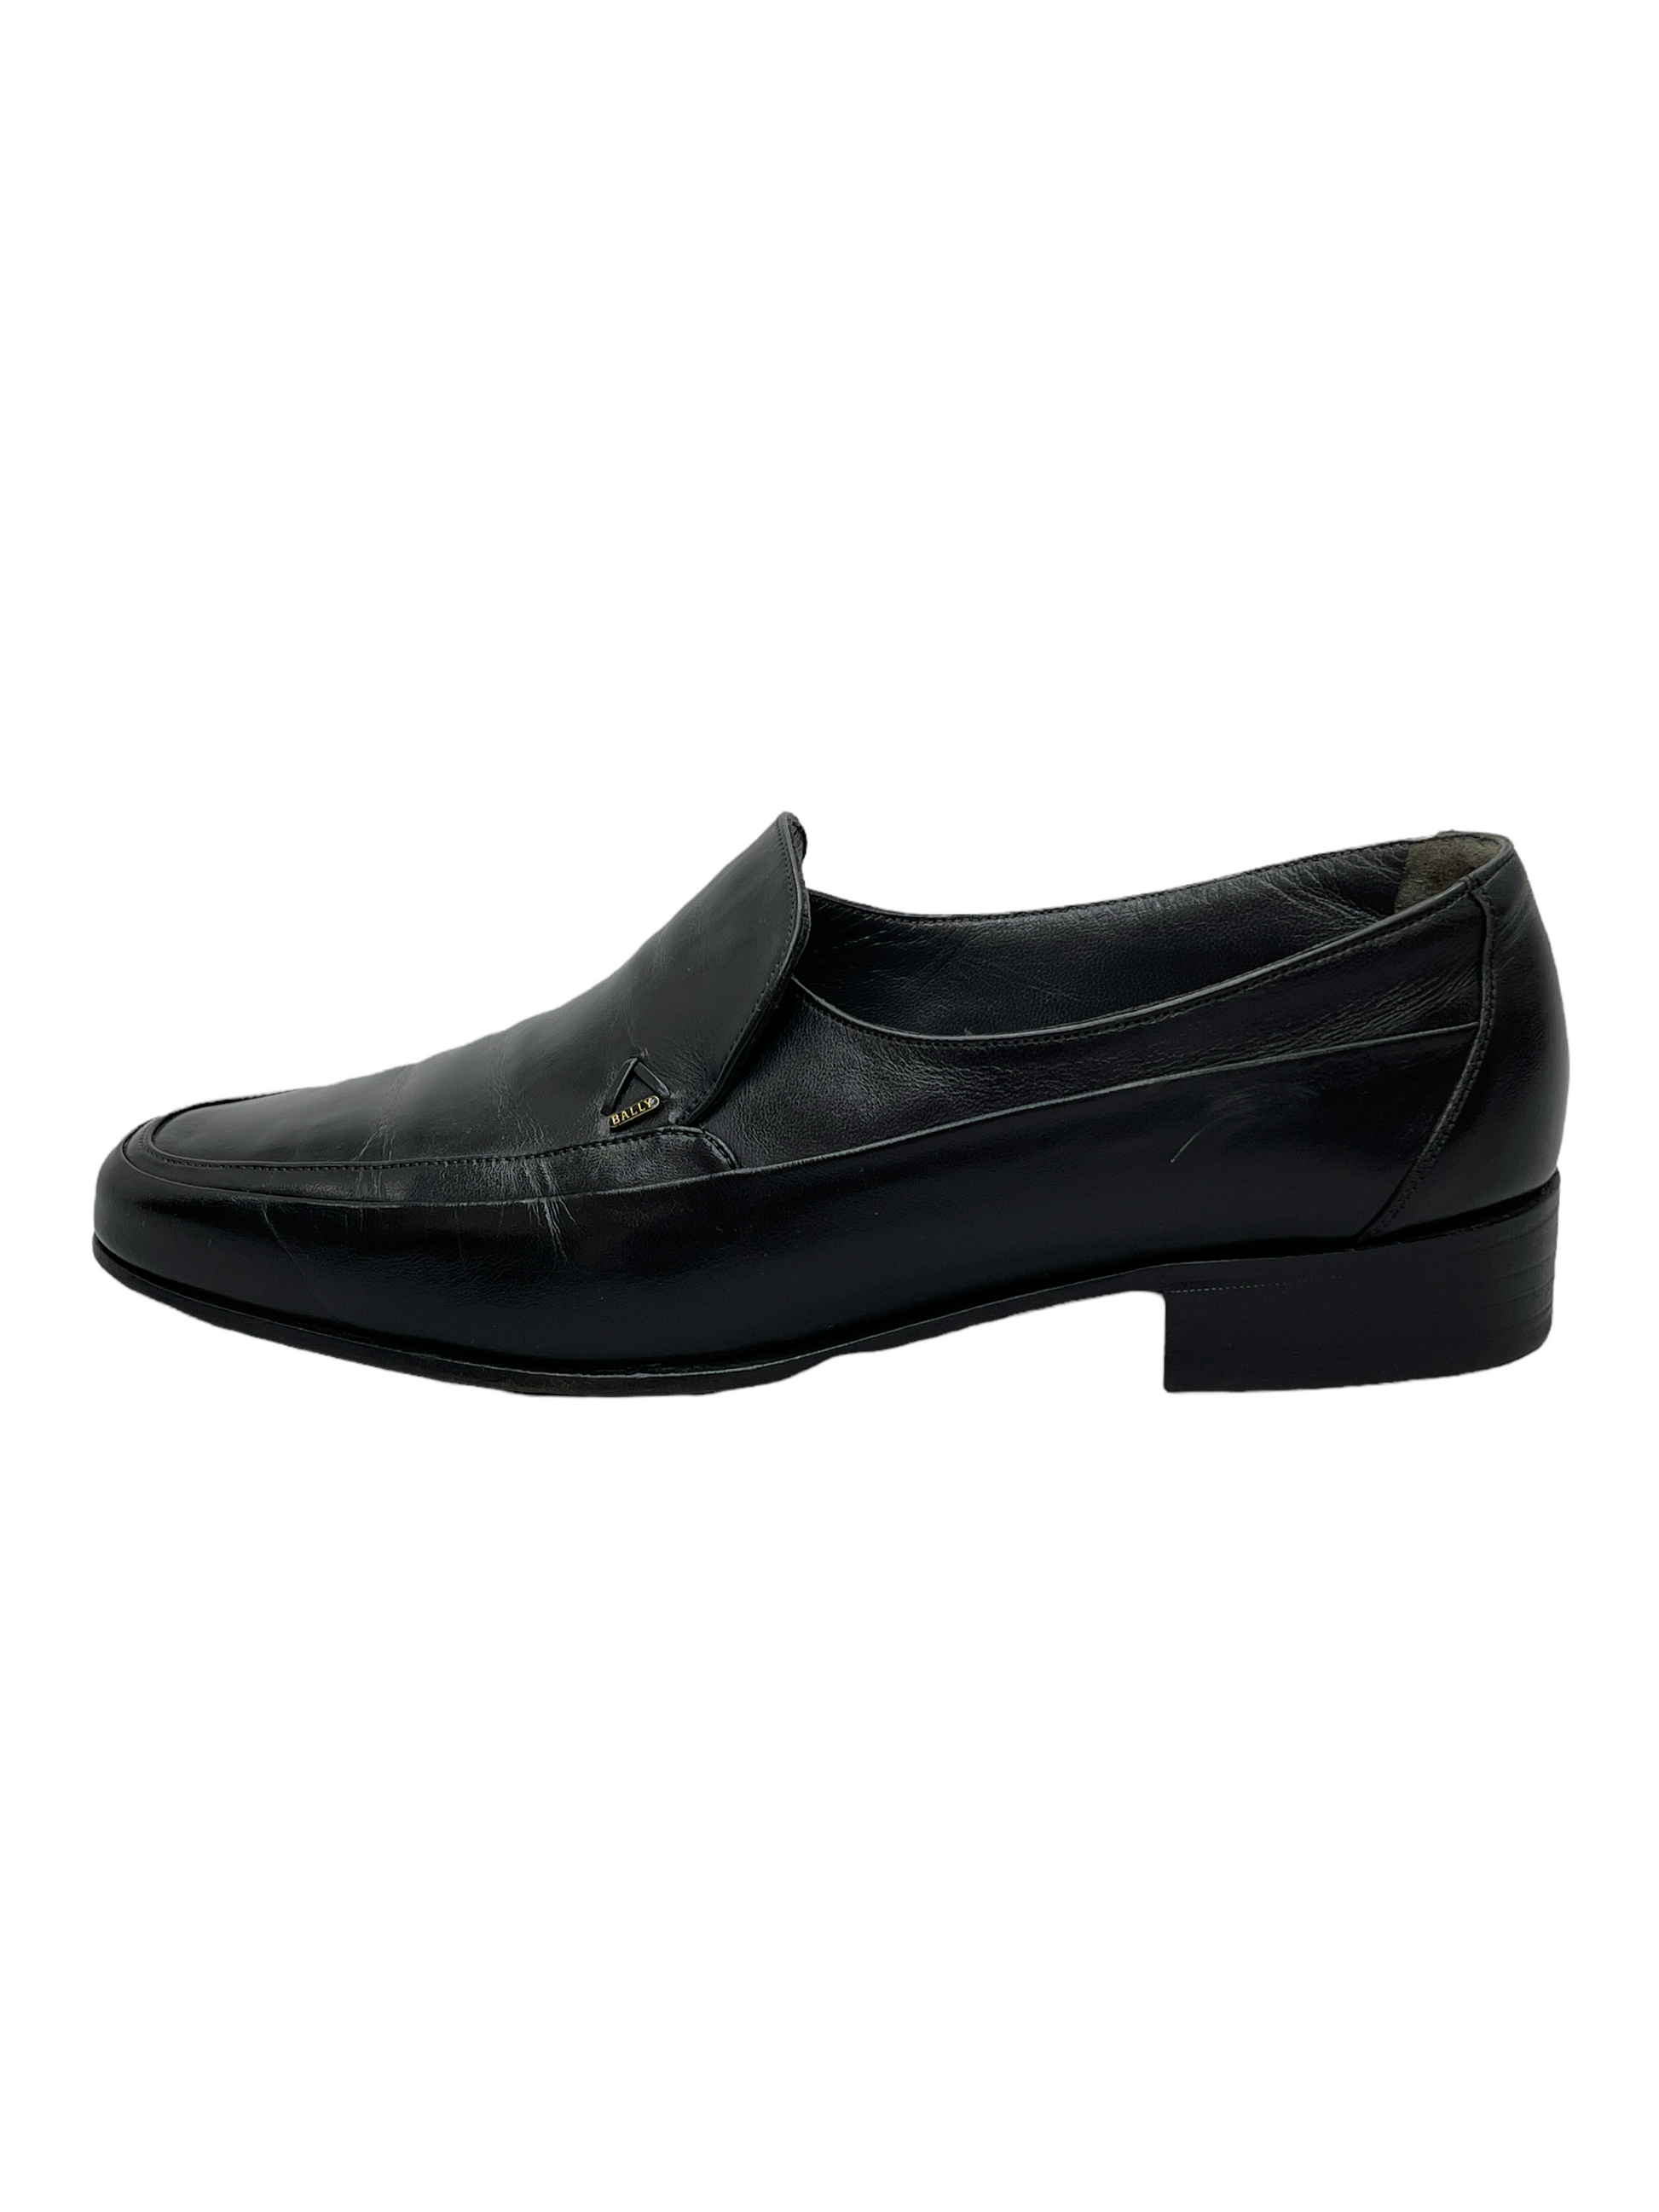 Bally Black Leather Penny Loafers 7.5 D US - Genuine Design Luxury Consignment for Men. New & Gently Used Clothing, Shoes, & Accessories. Calgary, Alberta, Canada.